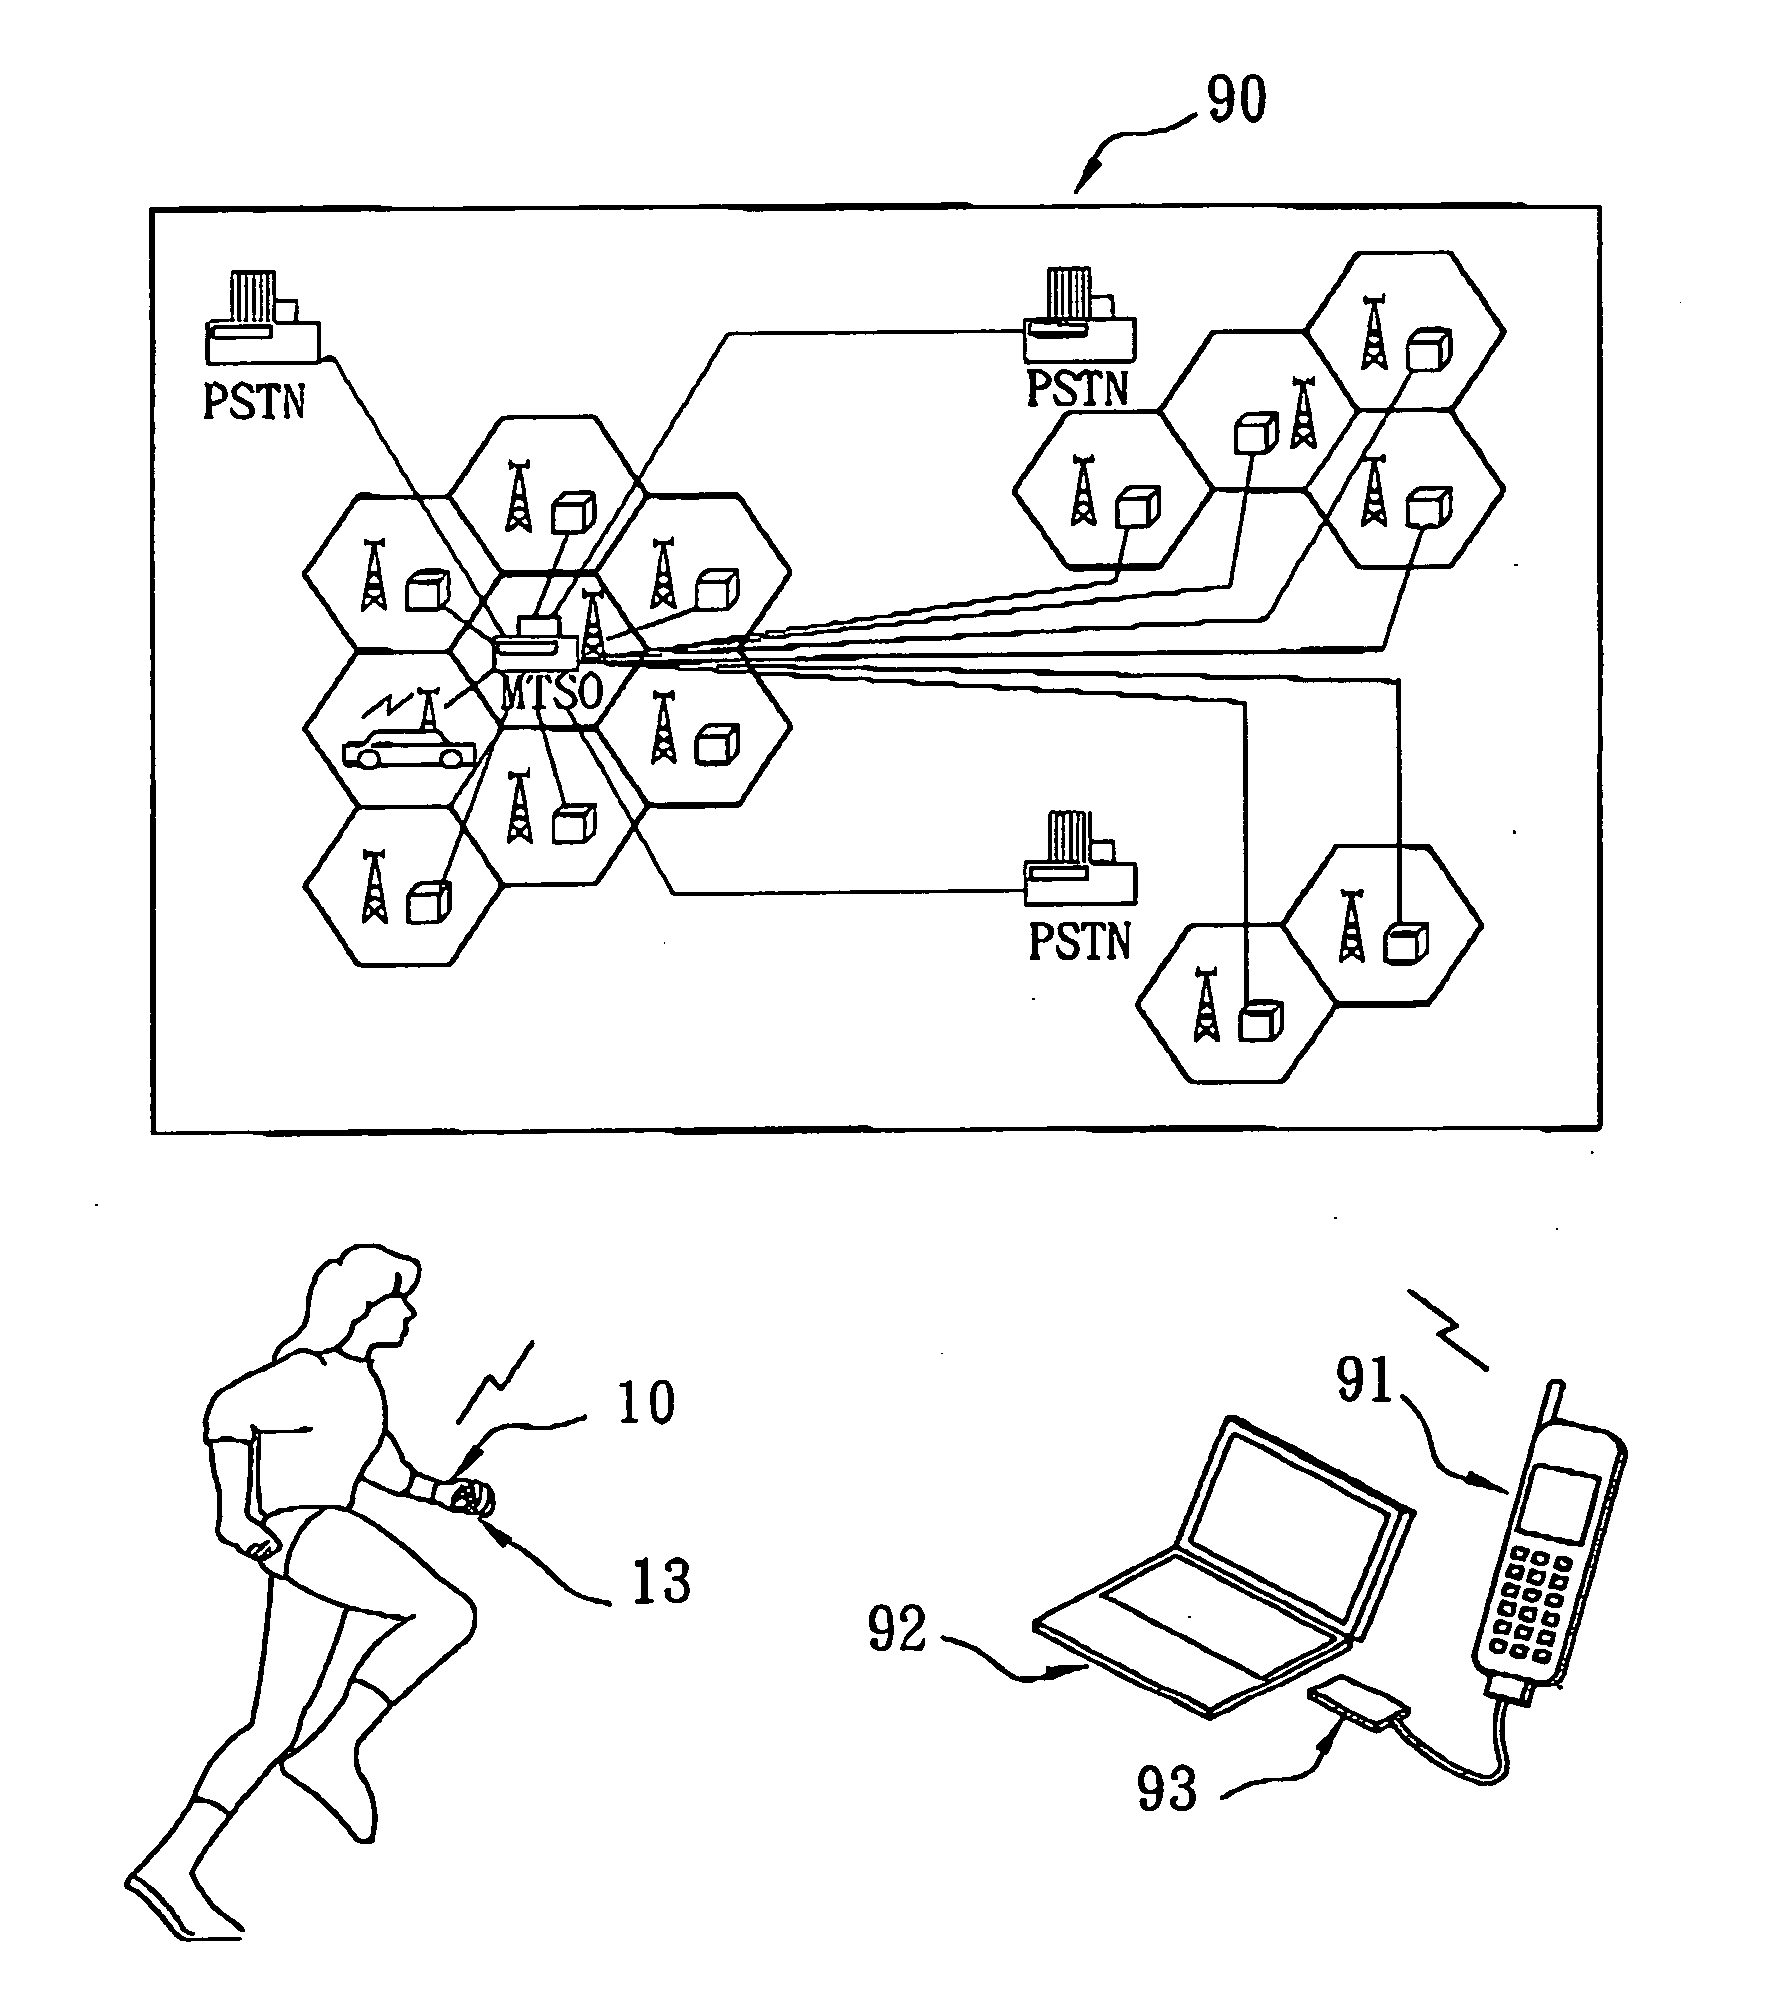 Mobile phone apparatus for performing sports physiological measurements and generating workout information